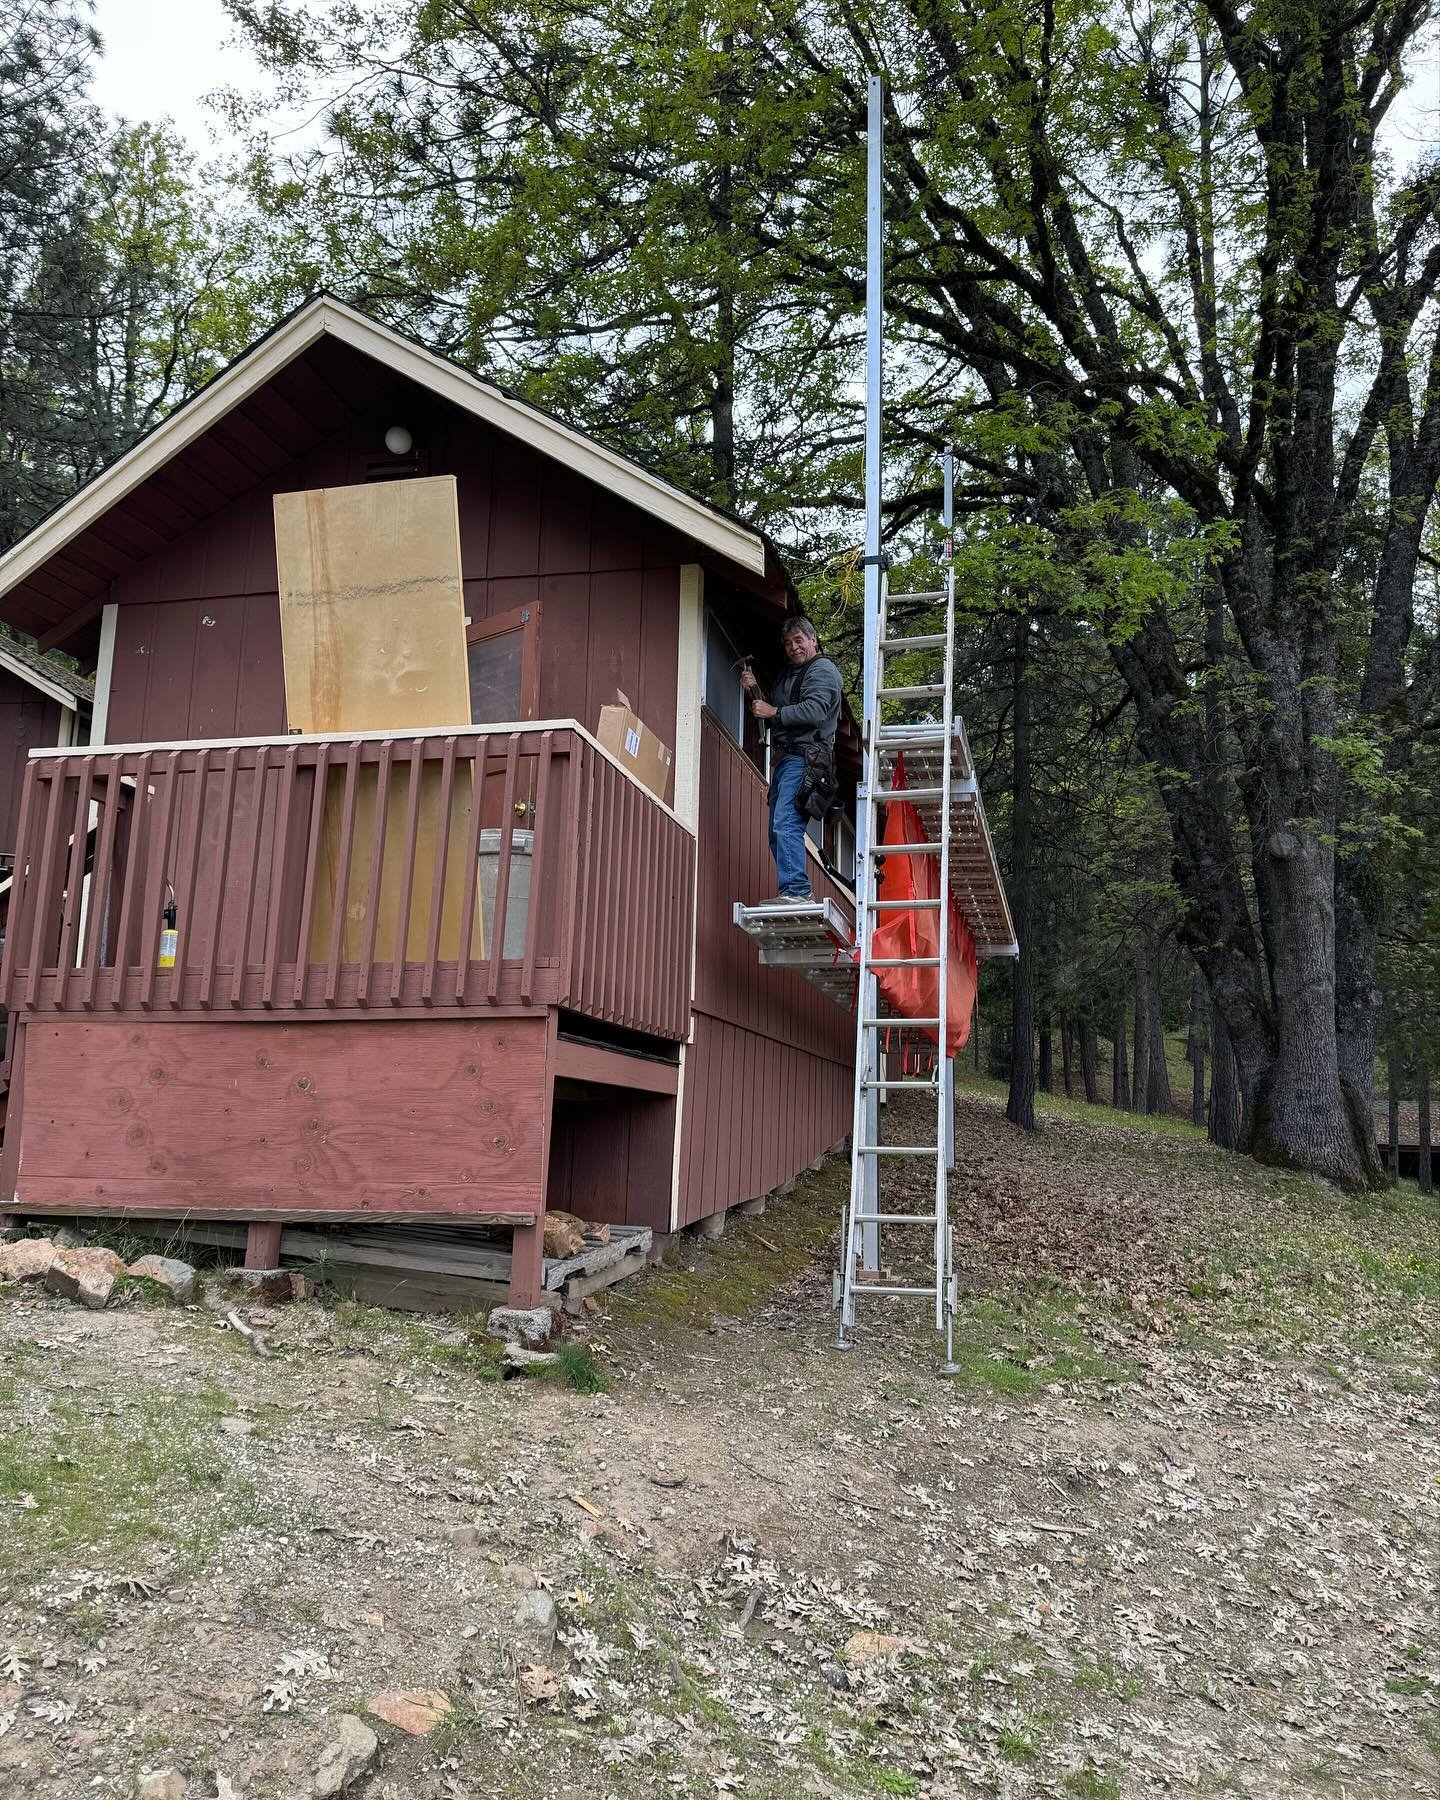 Knocking out another cabin remodel right before summer!! Tell us your favorite camp memory that pertains to your sleeping accommodations here at Diamond Arrow! Does anyone remember sleeping in the wagon train?

#followdaarrow #camp #summercamp #campl